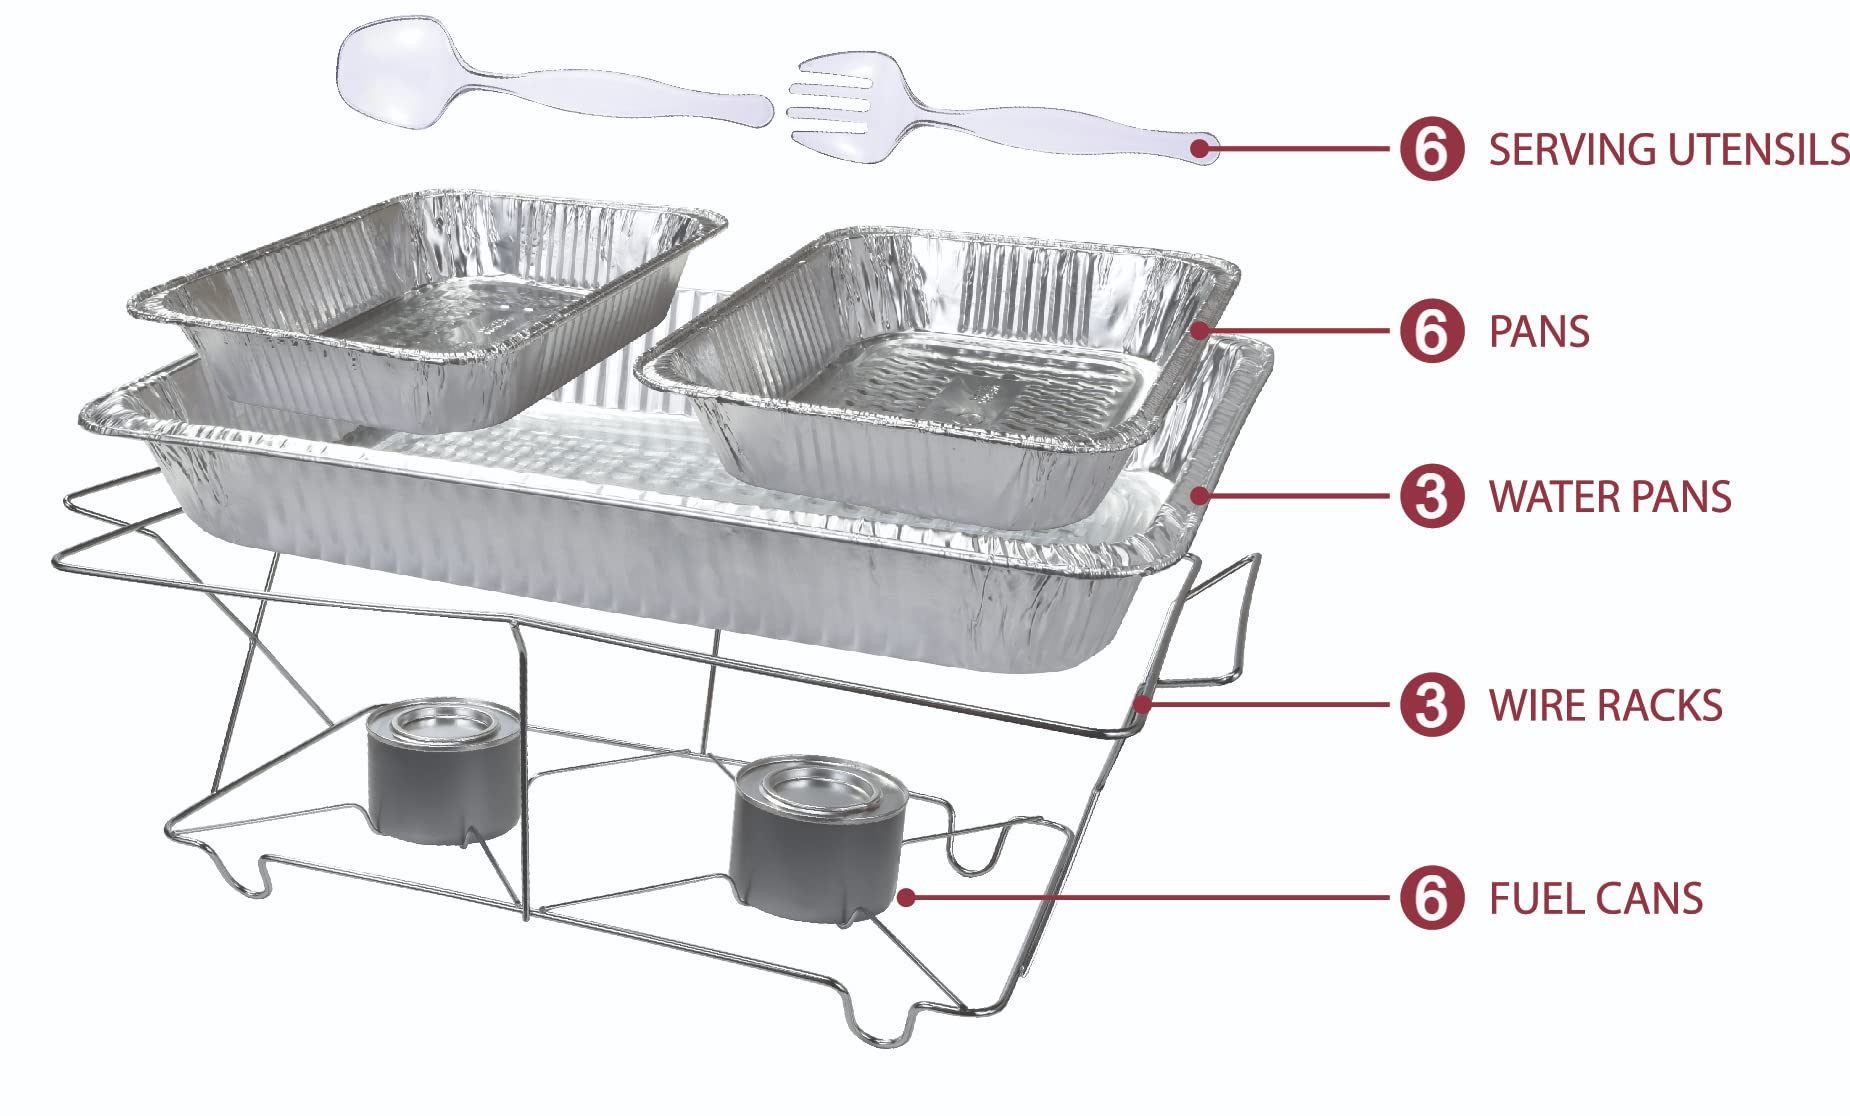 24 Piece Party Serving Kit Includes Chafing Dish Buffet Set and Serving Utensils For All Types Of Parties And Events, 3 complete Disposable Party Sets